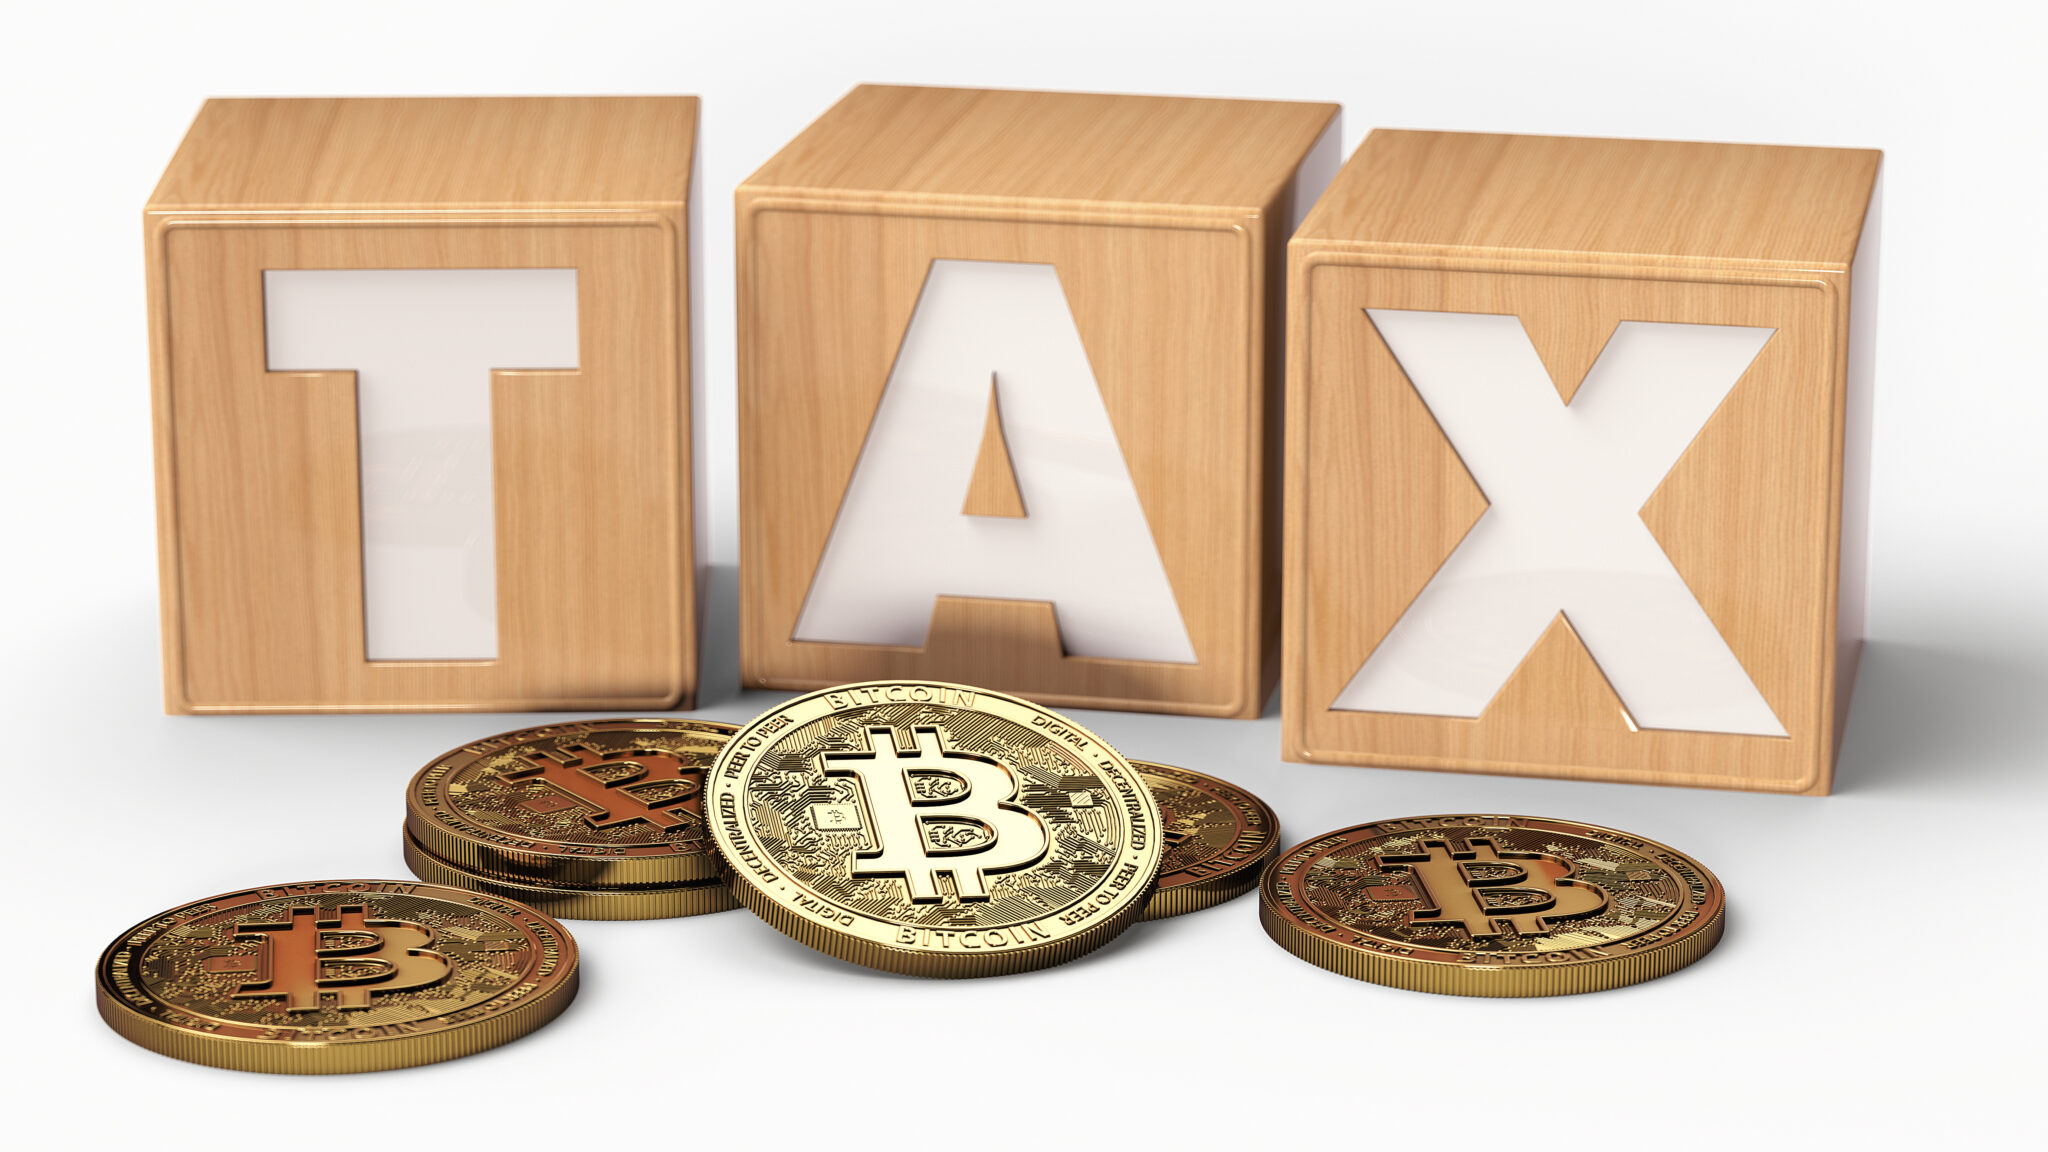 Wooden blocks with TAX letters on them and Bitcoin coins. Isolated 3D rendering